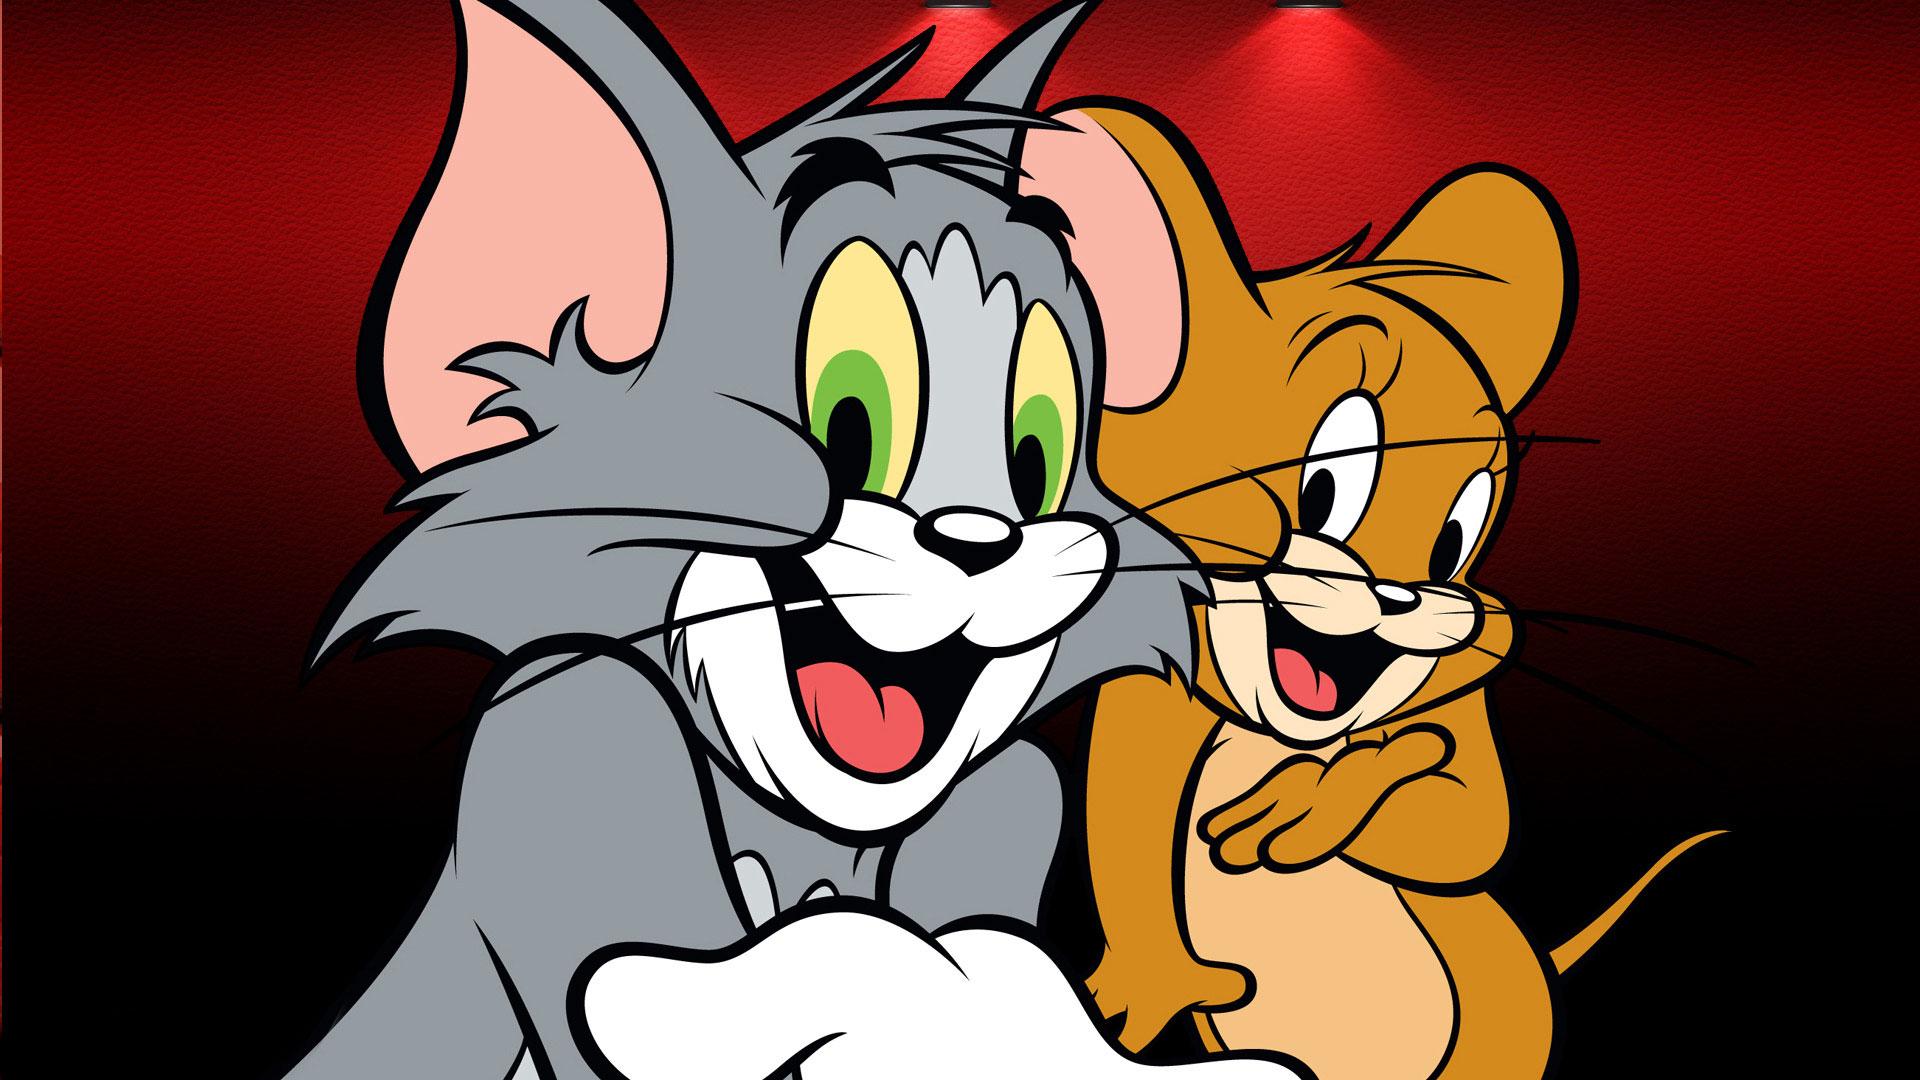 Tom And Jerry Desktop HD Wallpaper For Pc Tablet And Mobile 1920x1080, Wallpaper13.com